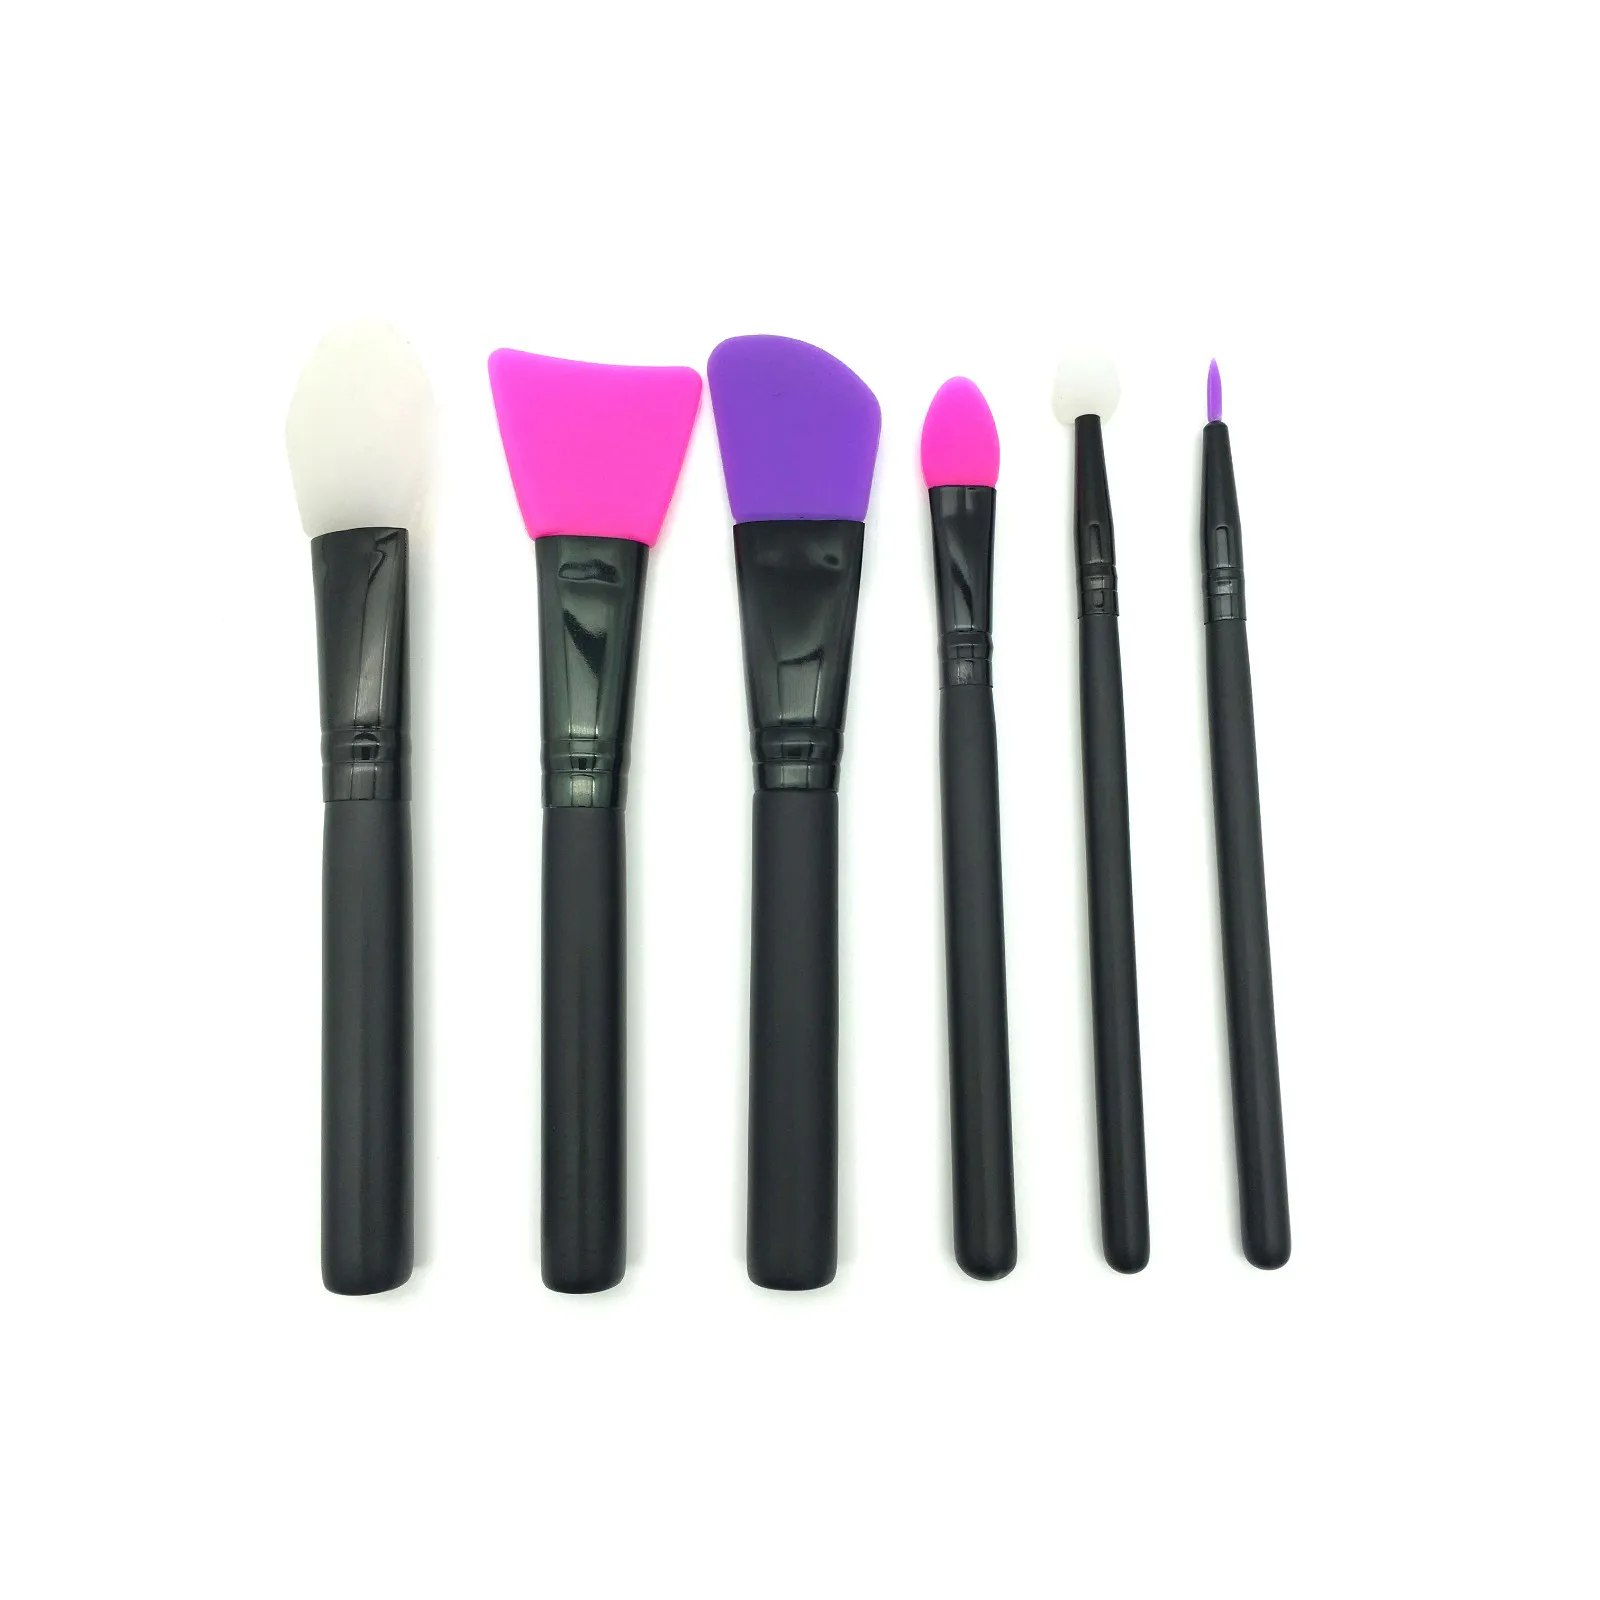 Suprabeauty retractable high quality makeup brushes wsb for eyeshadow